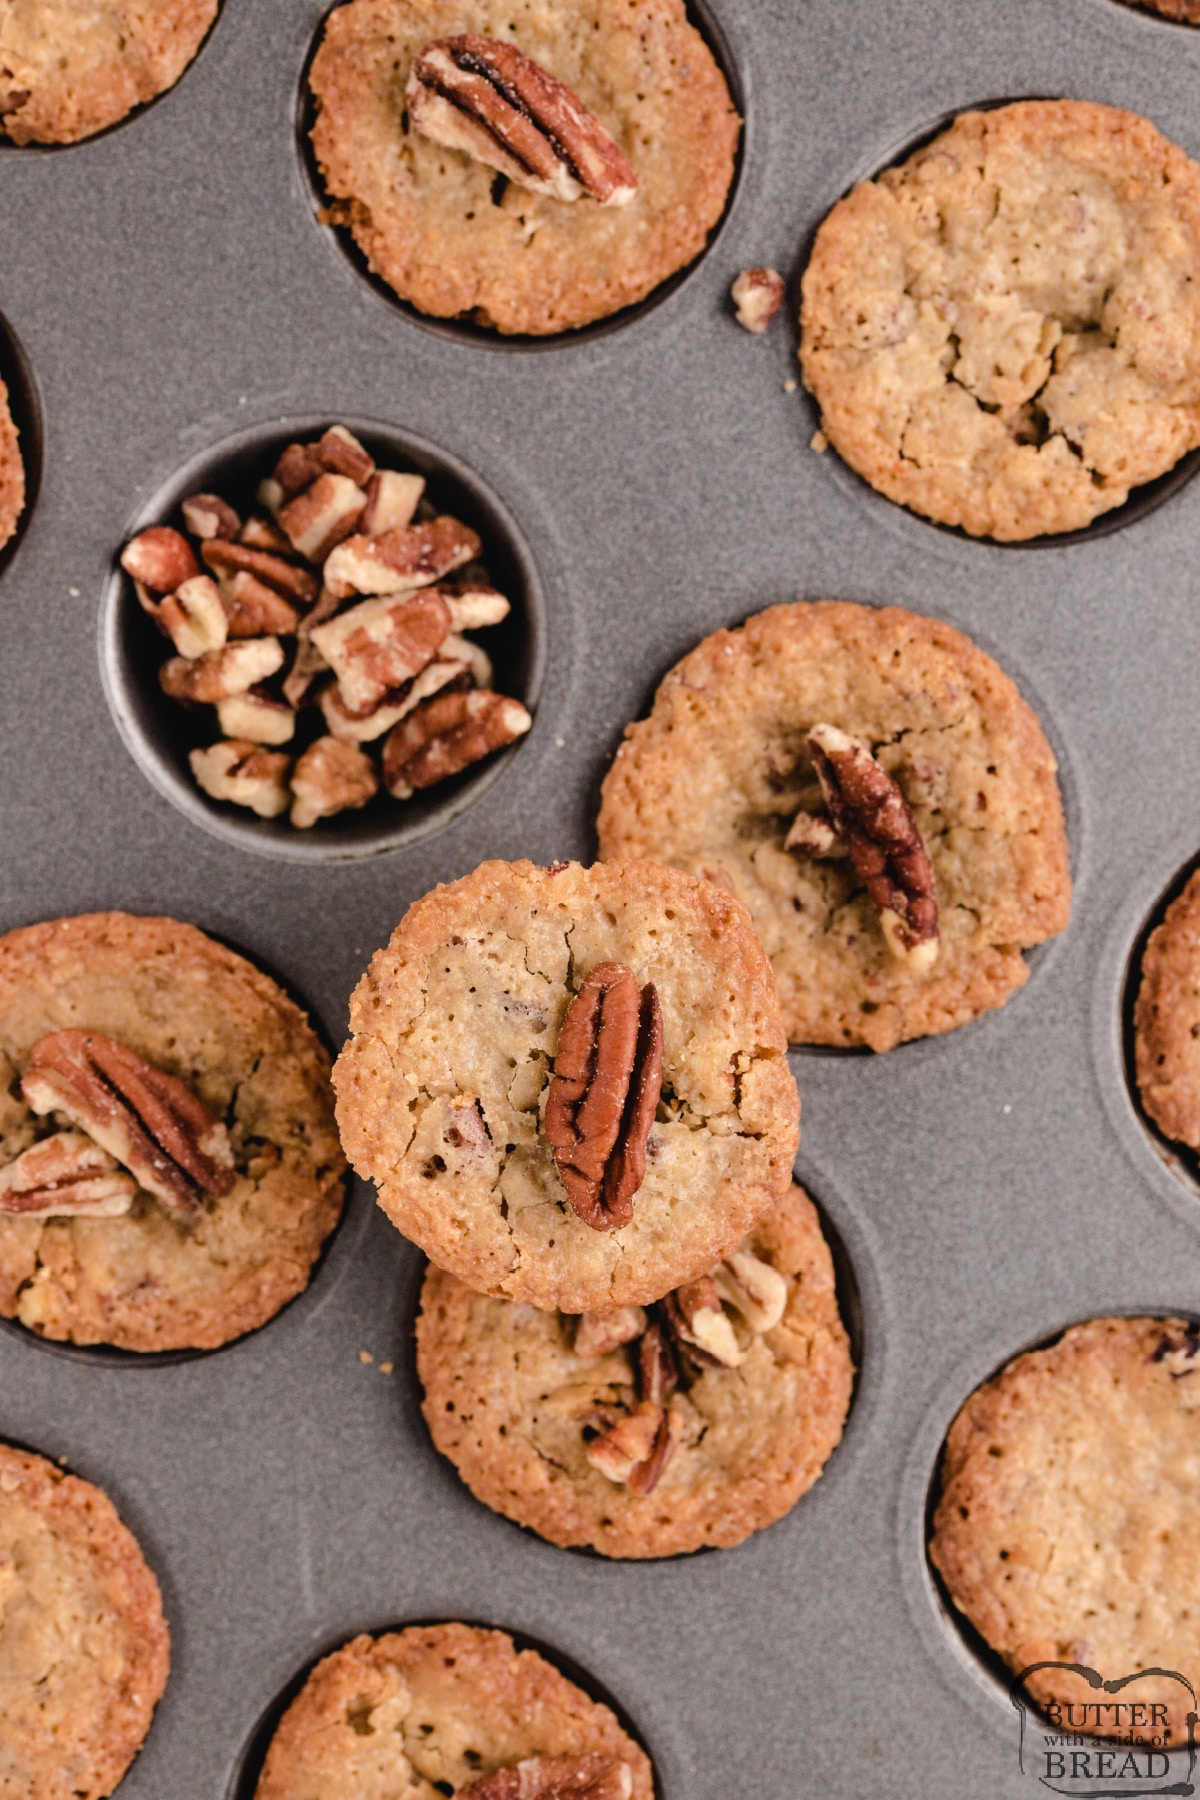 Mini muffins made with five ingredients that tastes like pecan pie